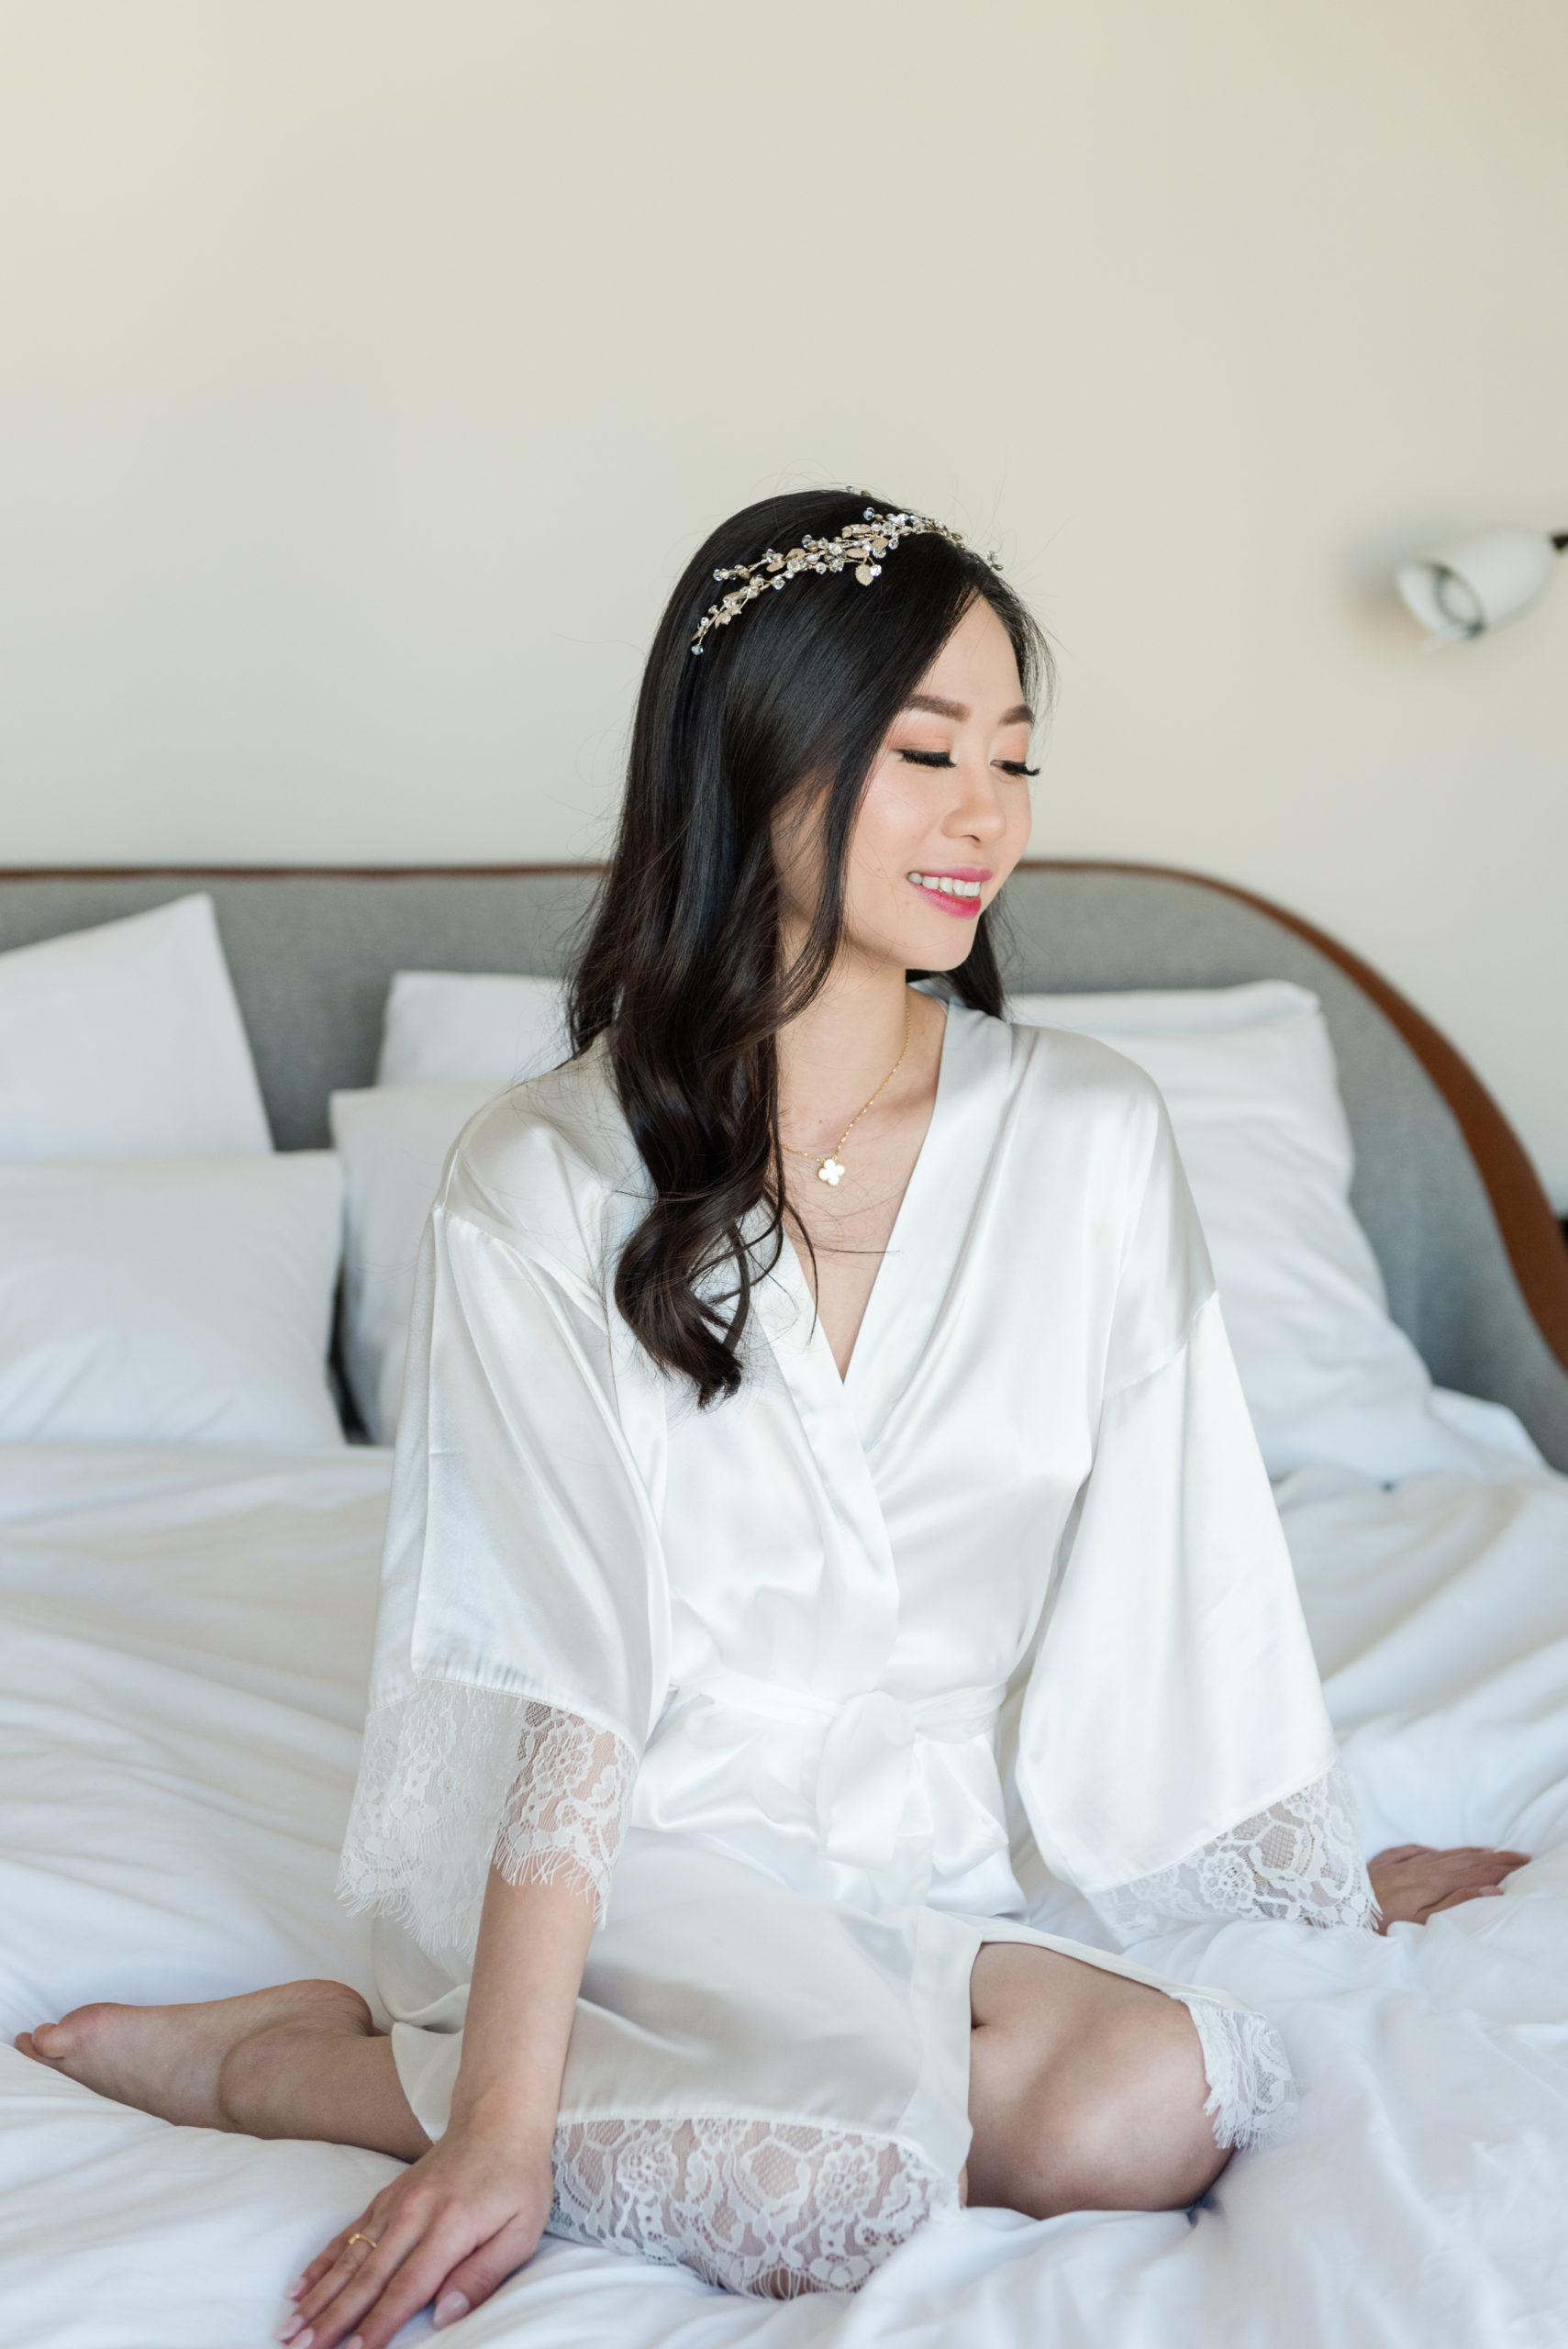 Tiffany and Tommy Wedding at The Virgin Hotels in Nashville, Tennessee. This glamourous, modern wedding captured by Rebecca Musayev Photography was nothing short of spectacular.